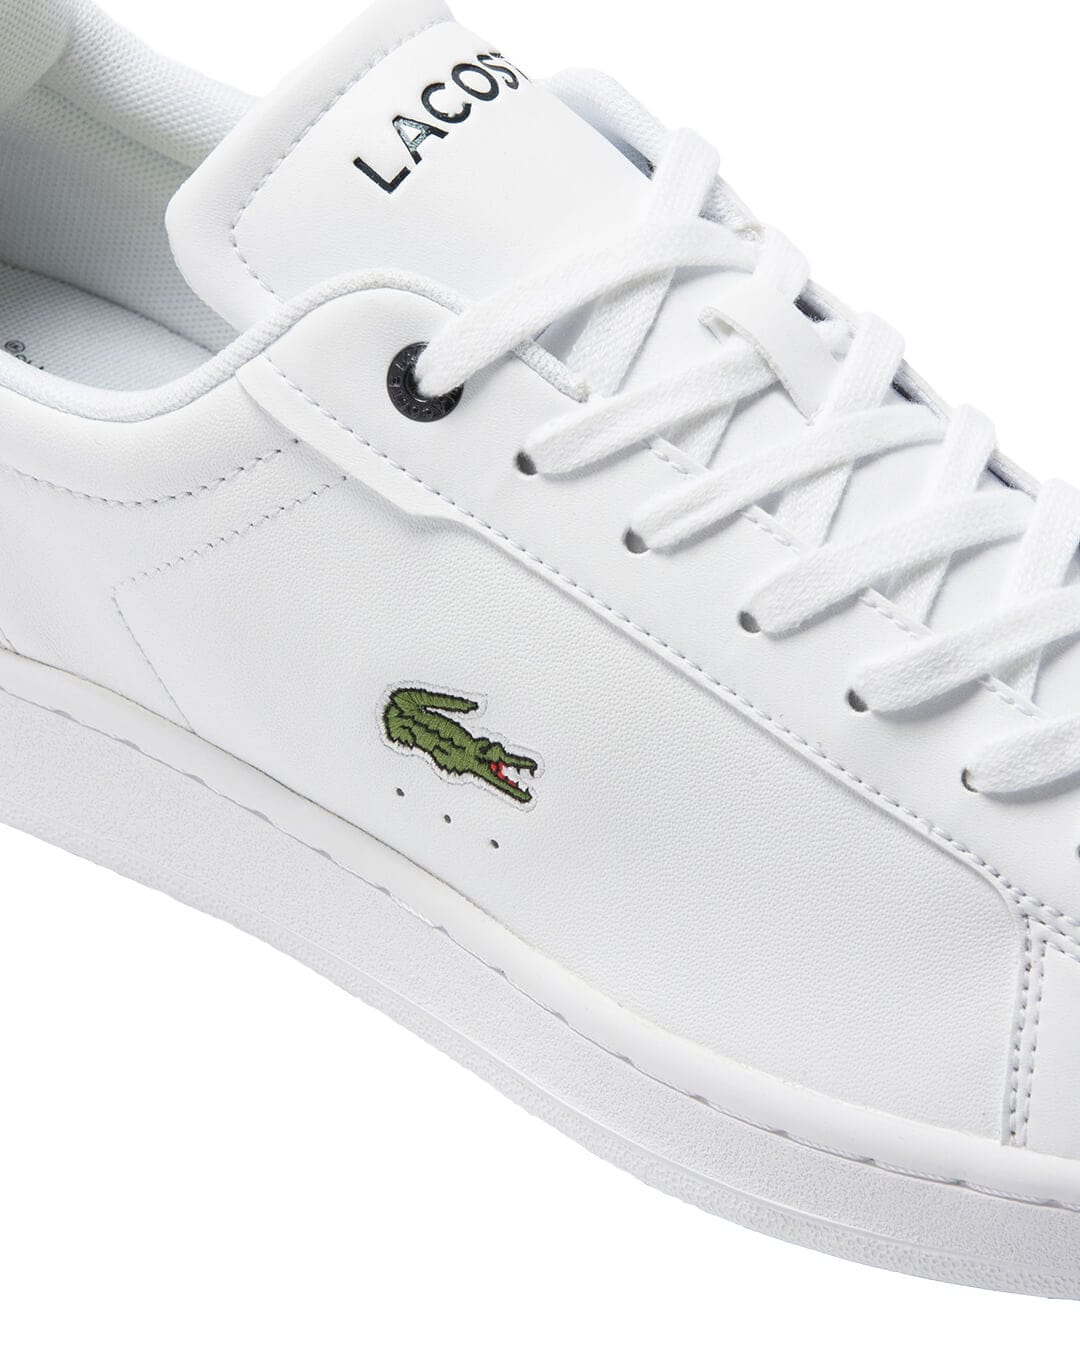 Lacoste Shoes Lacoste Carnaby Pro BL Leather White Tonal Sneakers